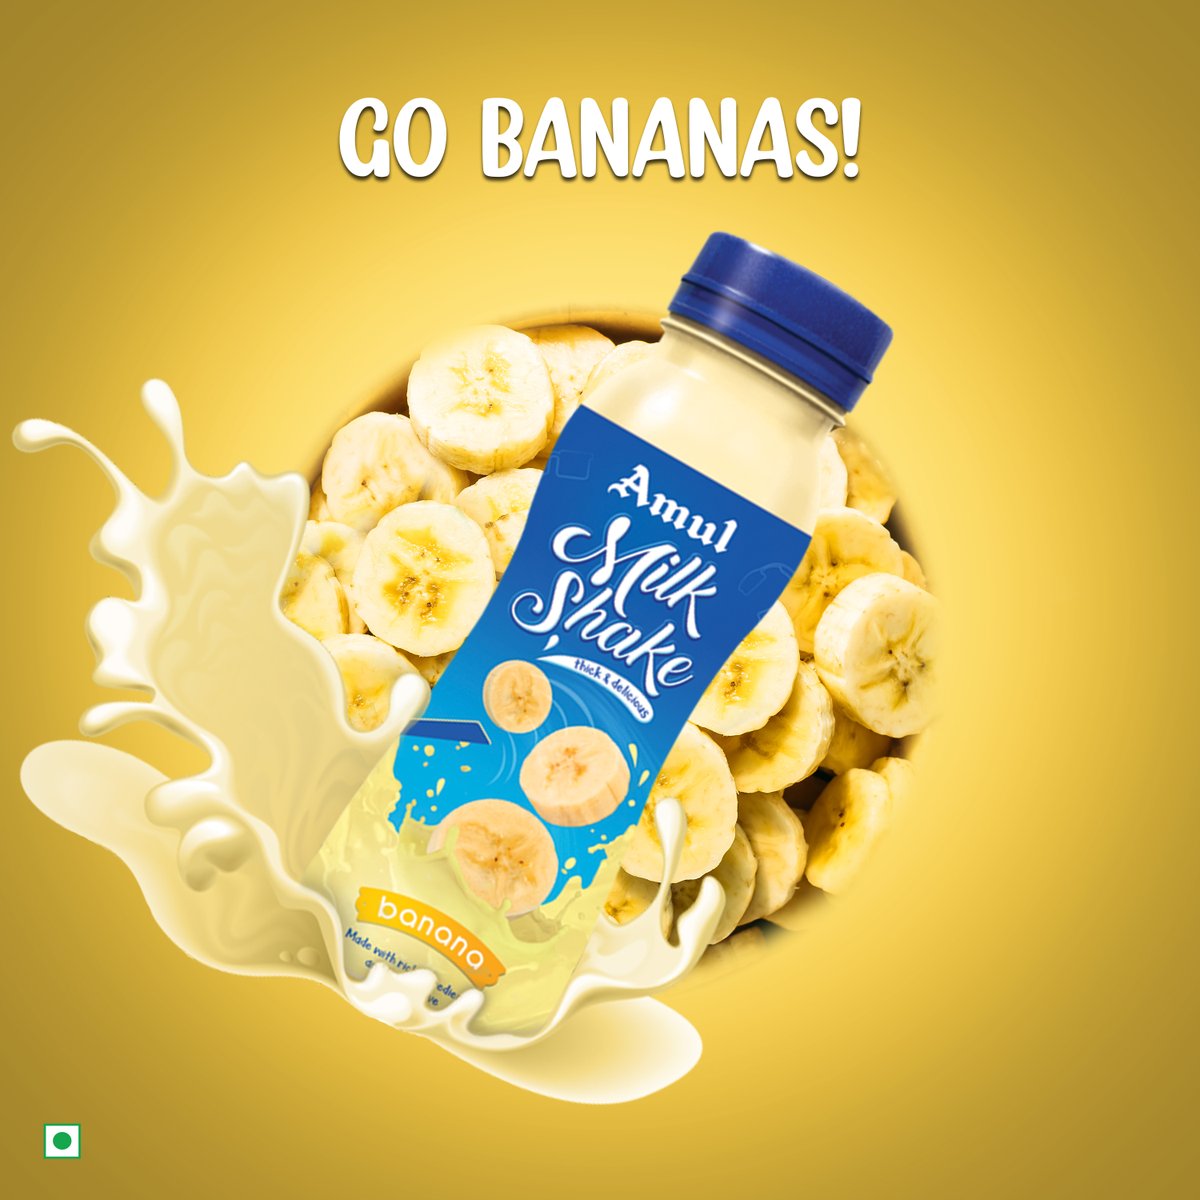 Have a quick energy boost and go bananas with this yummy and creamy Amul Banana Milkshake! So smooth, and so banana-licious! 
#Amul #AmulMilkshake #BananaMilkshake #BananaShake #Milkshake